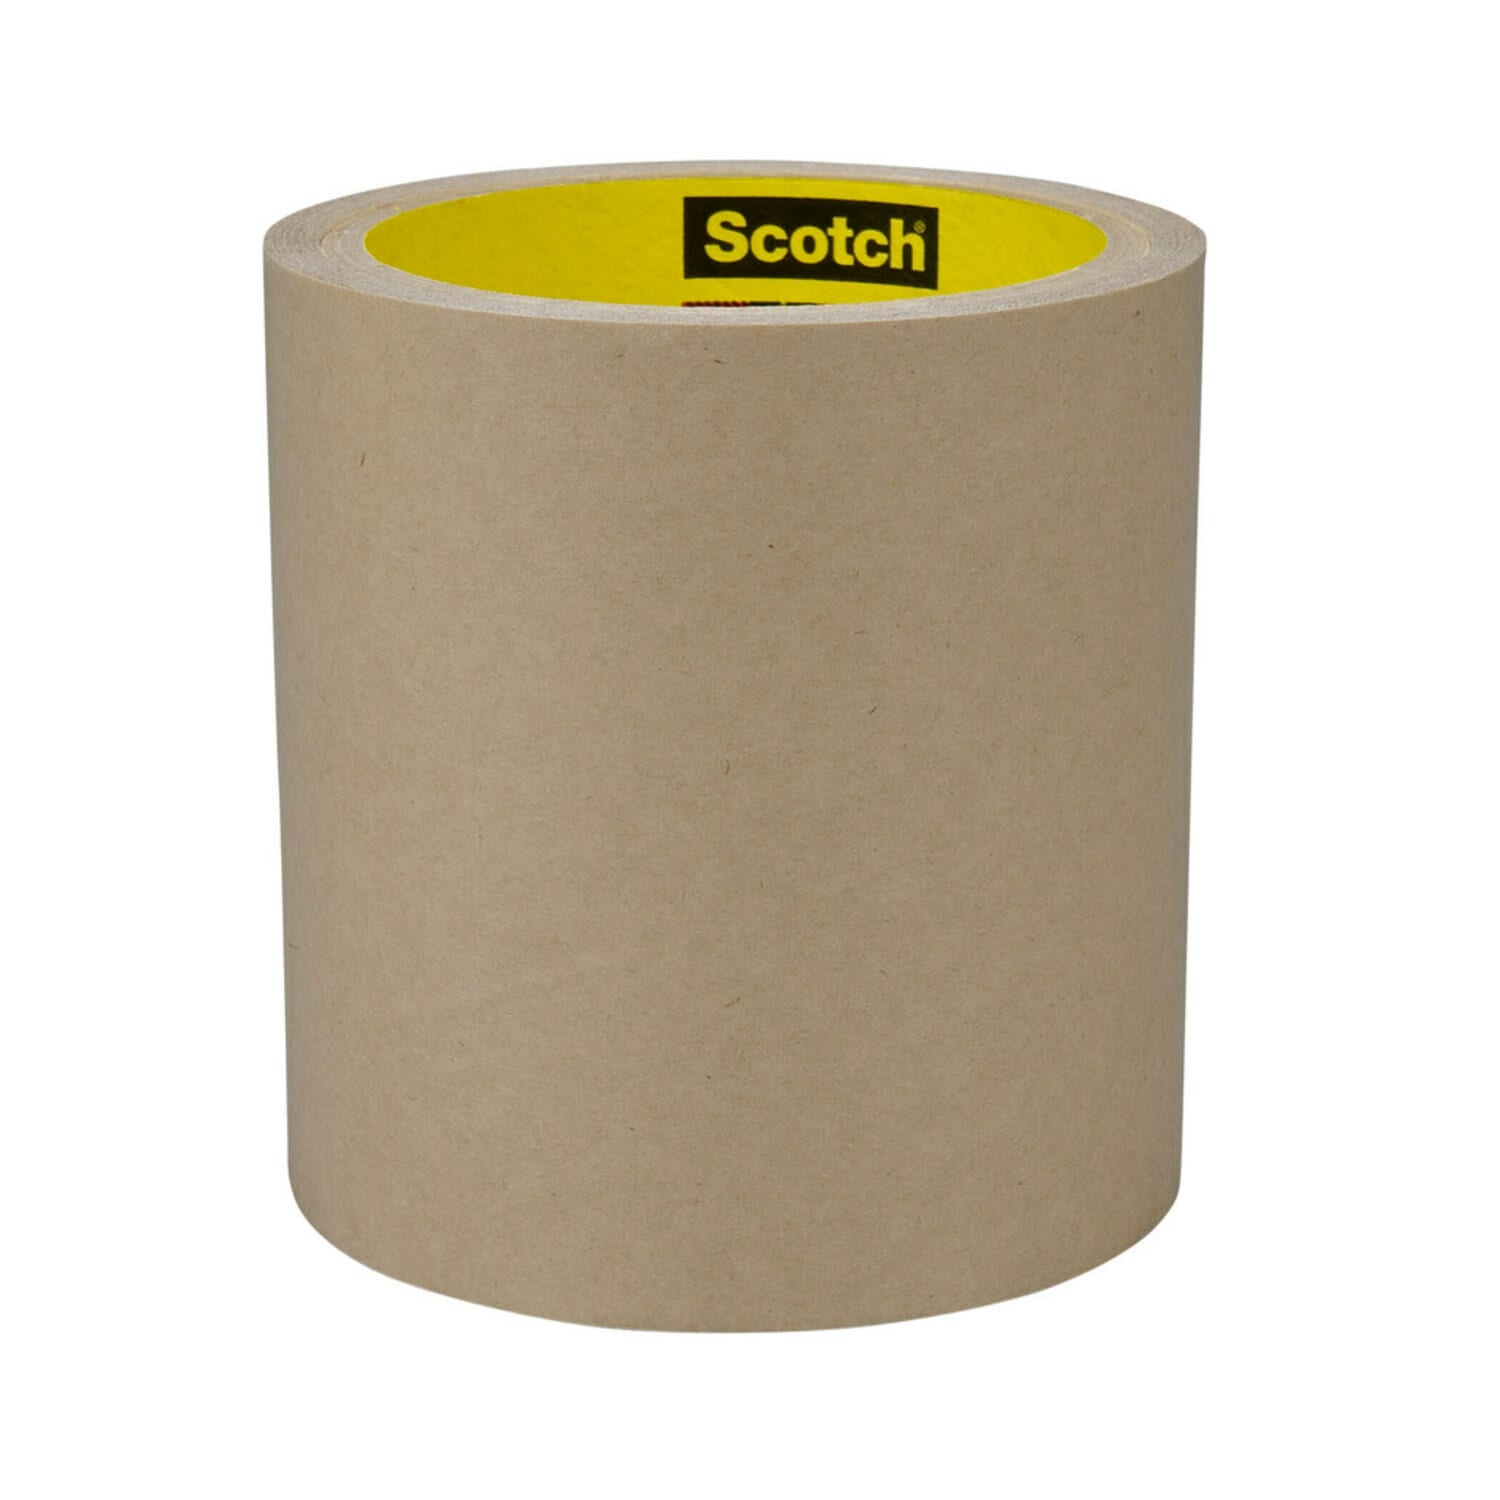 7010373110 - 3M Adhesive Transfer Tape 9482PC, Clear, 3/4 in x 180 yd, 2 mil, 12
rolls per case